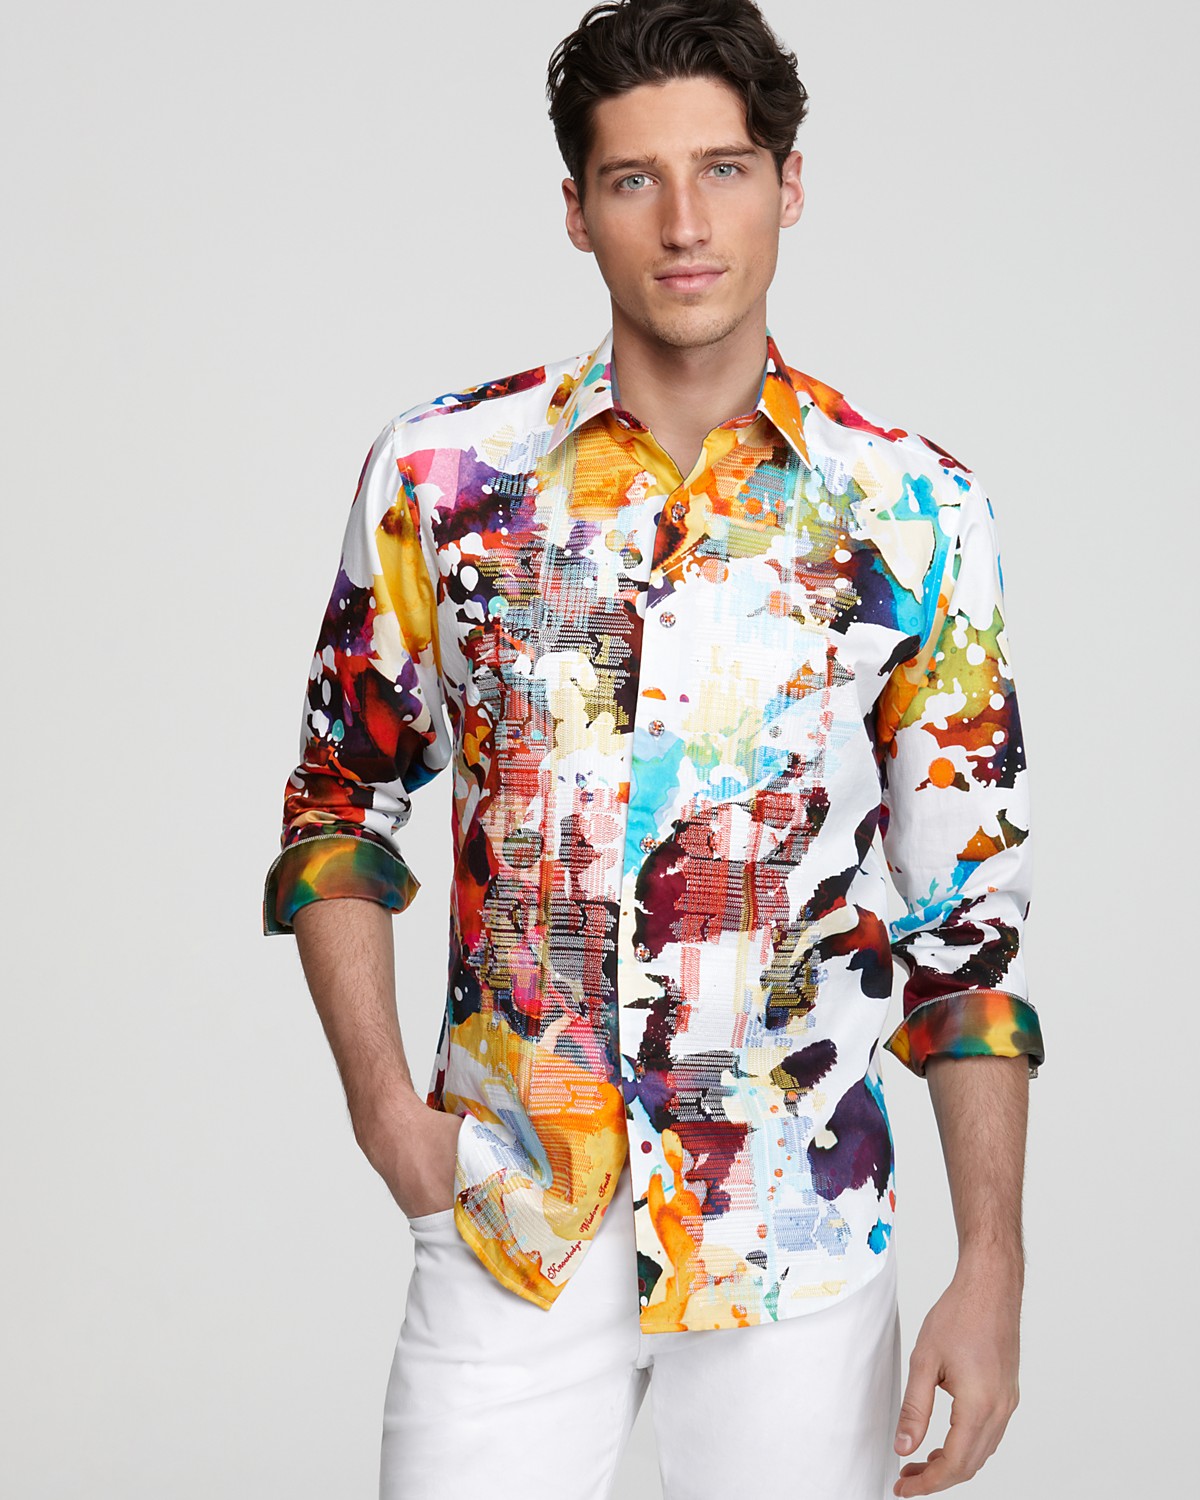 Ryan Kennedy Wears Summer Shirts for Bloomingdale's – The Fashionisto